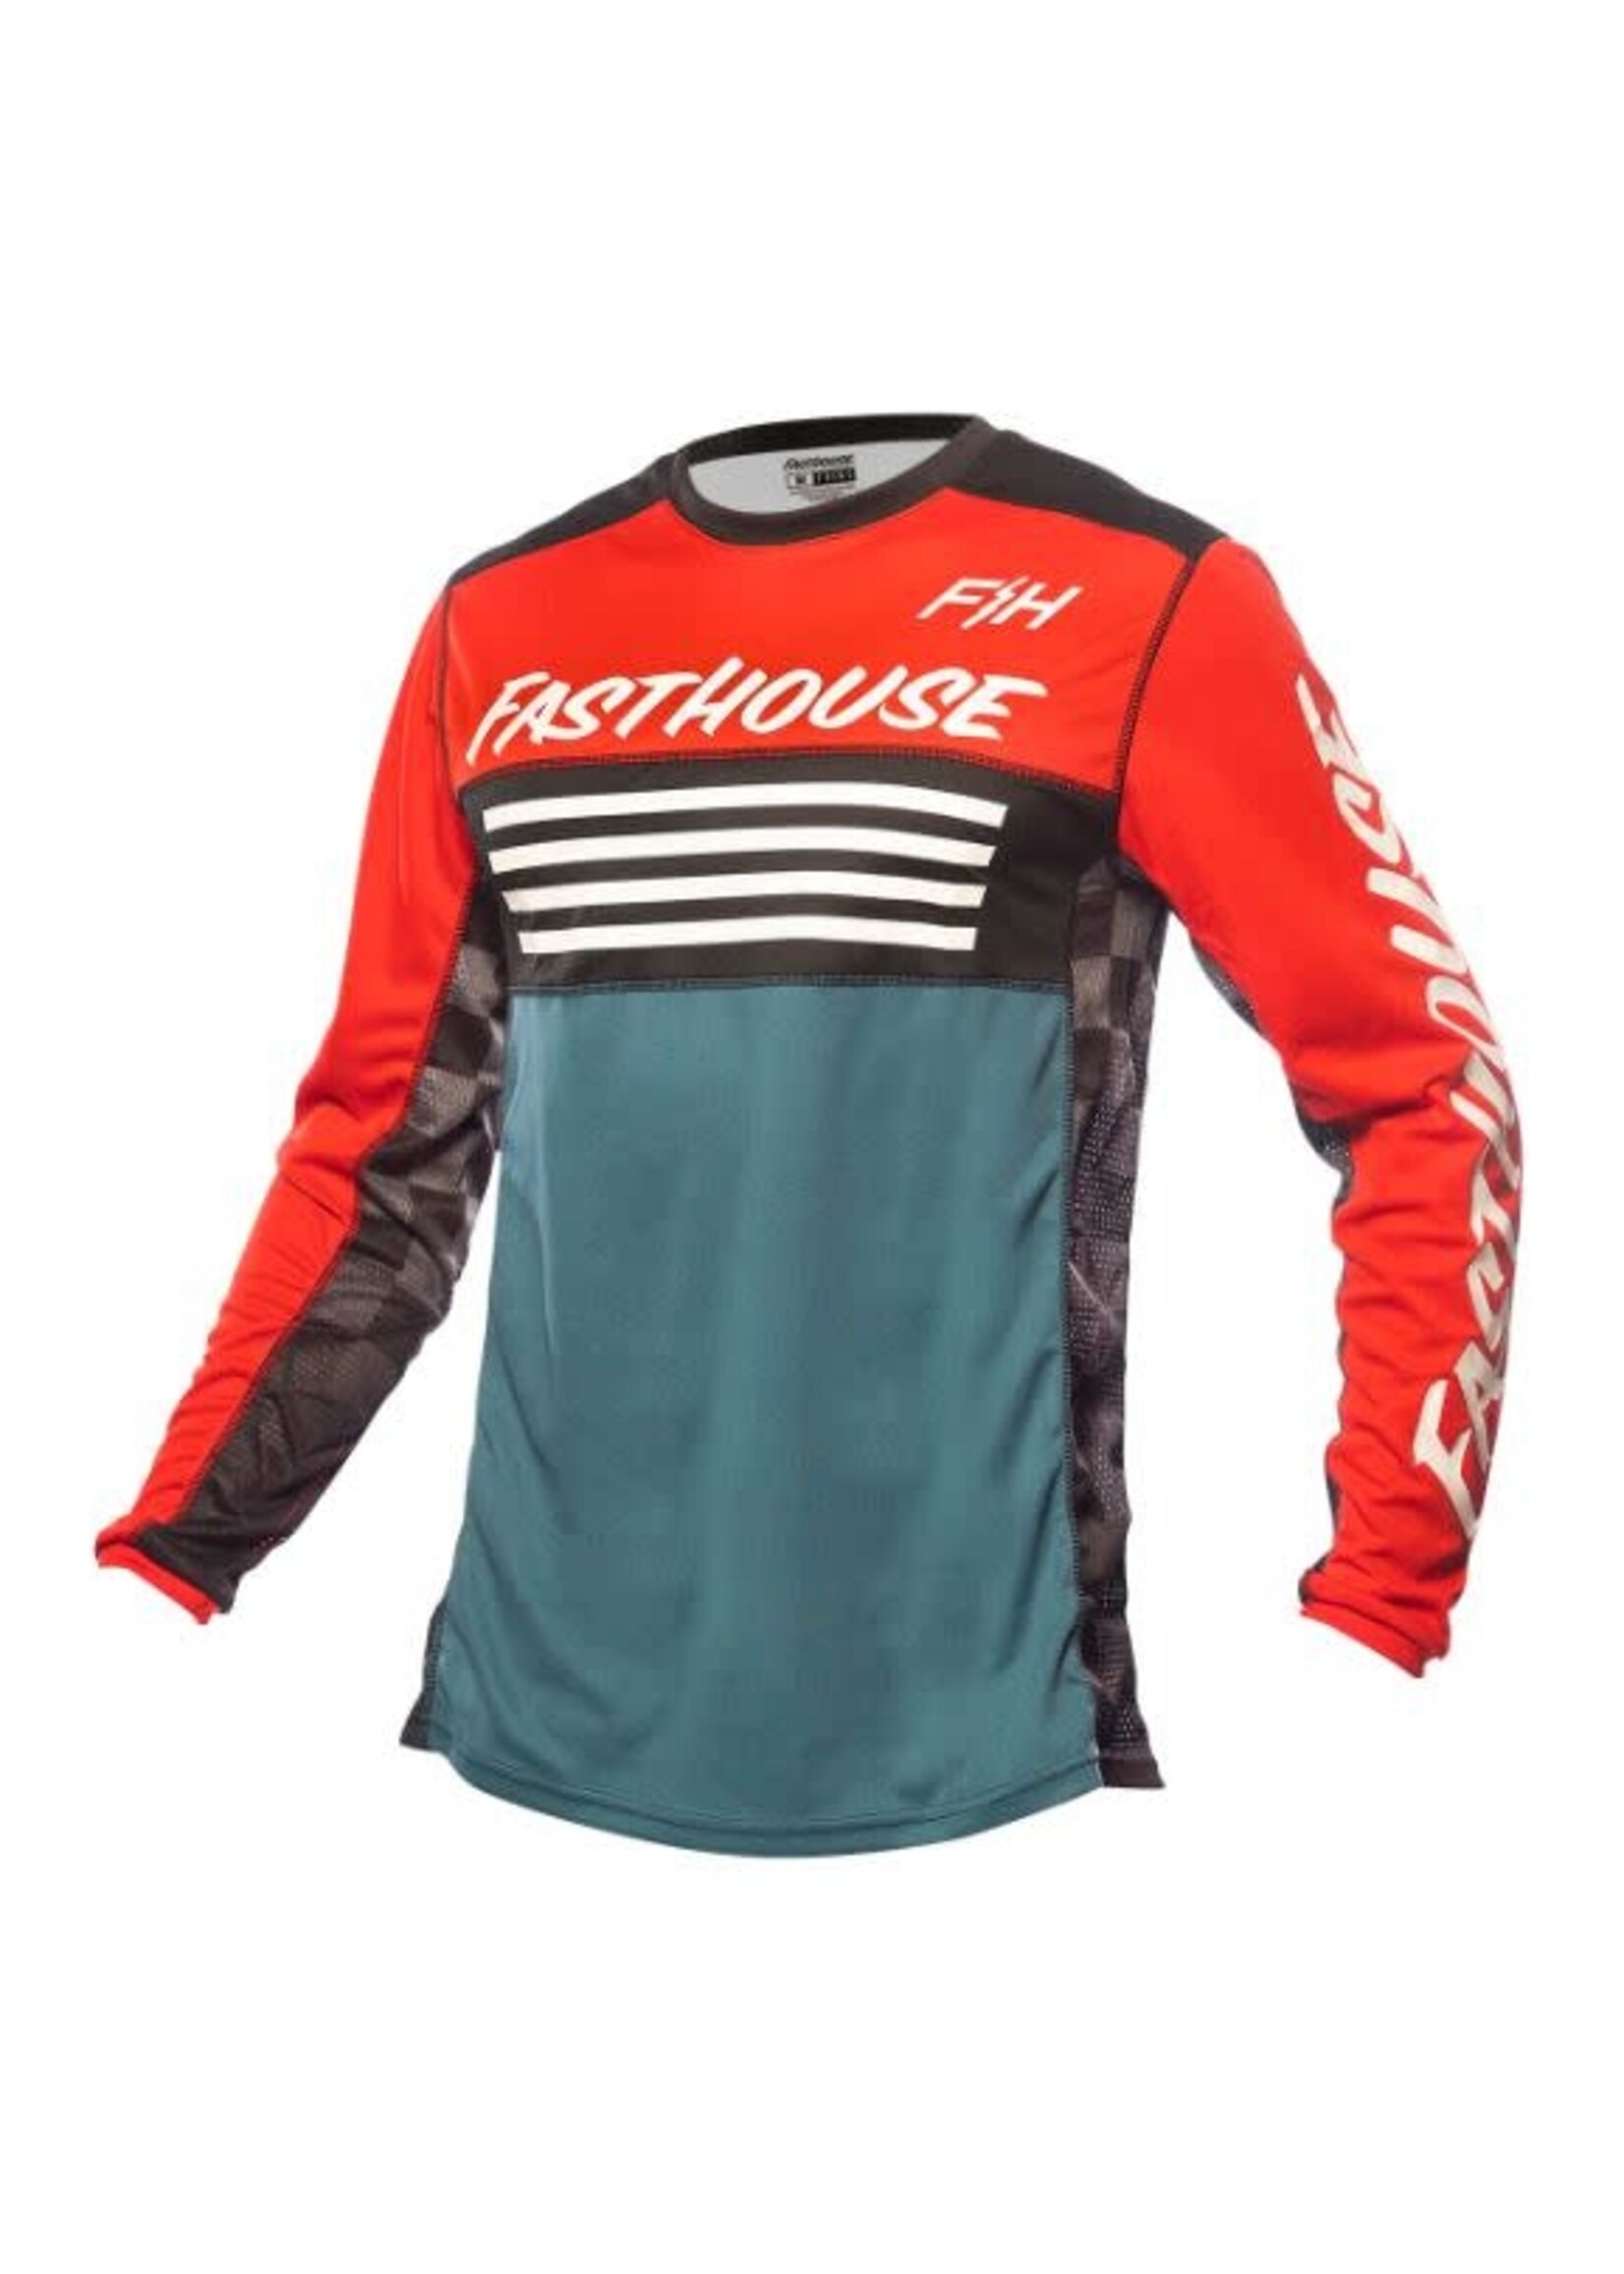 Grindhouse Omega Jersey [Red/White/Blue]